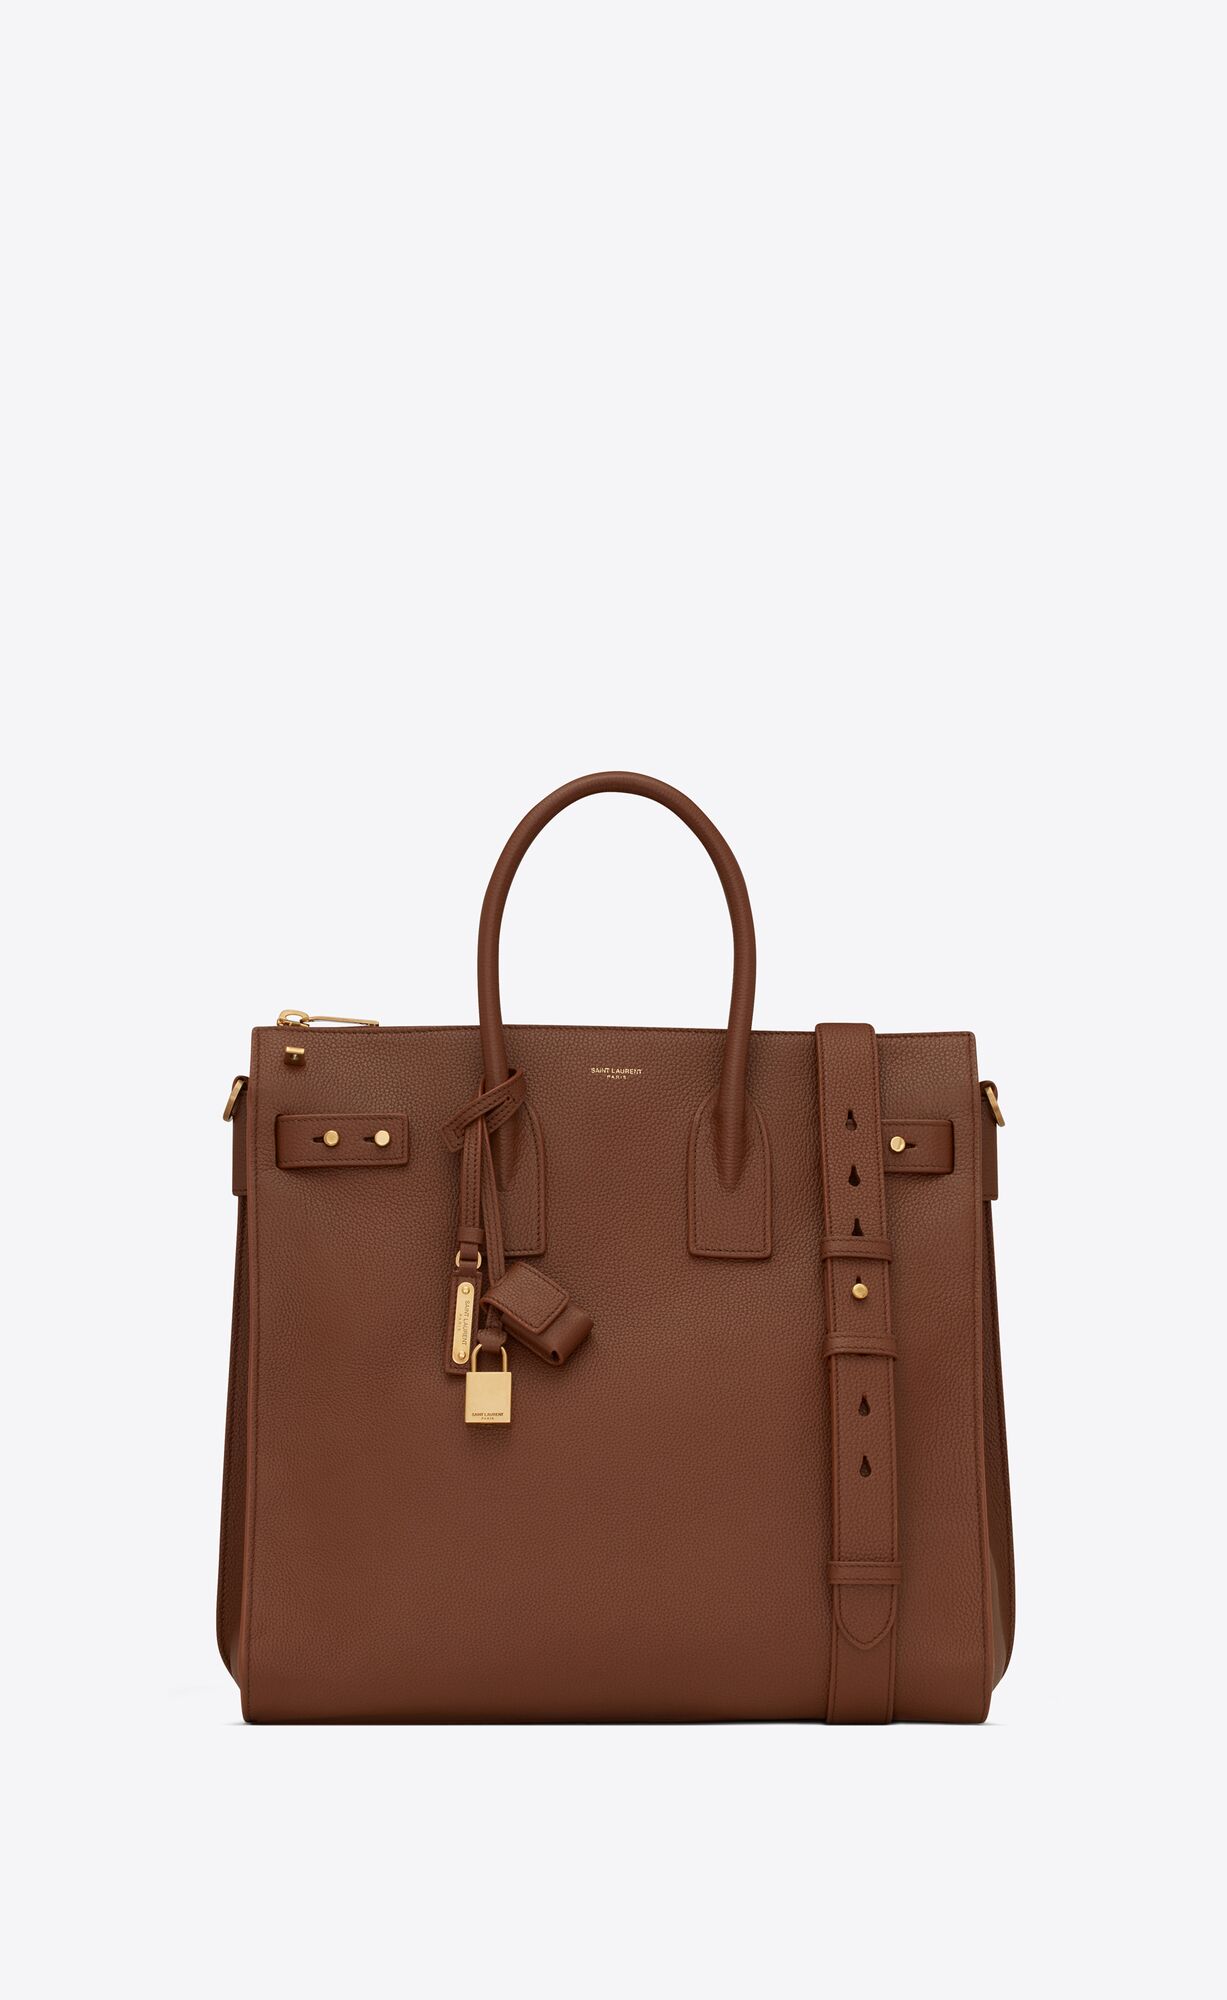 Saint Laurent Sac De Jour North/south Tote In Grained Leather – Toasted Brown – 480583DTI0W2126